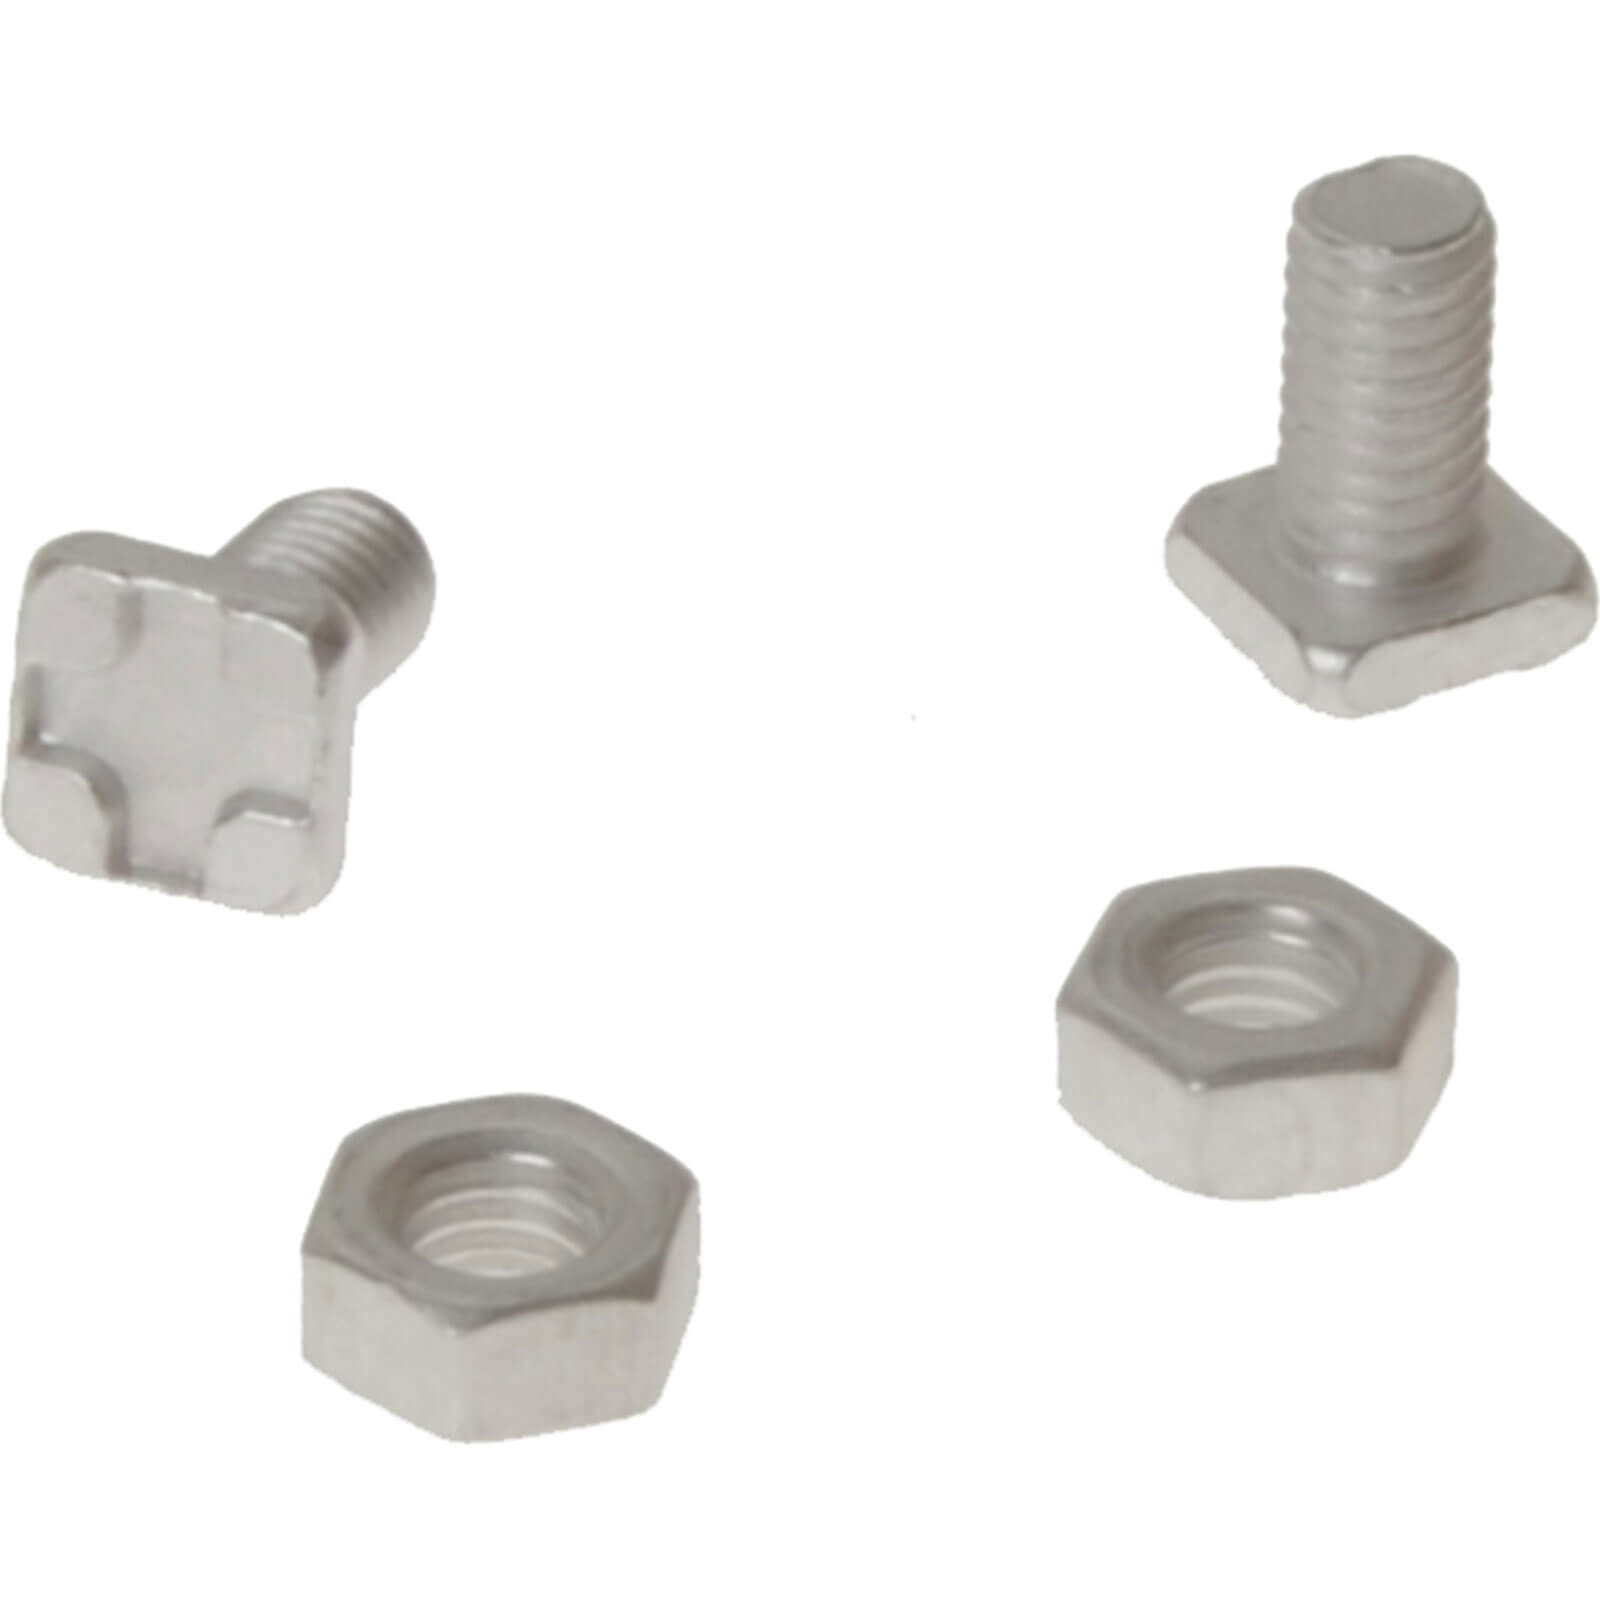 ALM Manufacturing GH004 Aluminium Square Head Bolts and Nuts Pack of 20